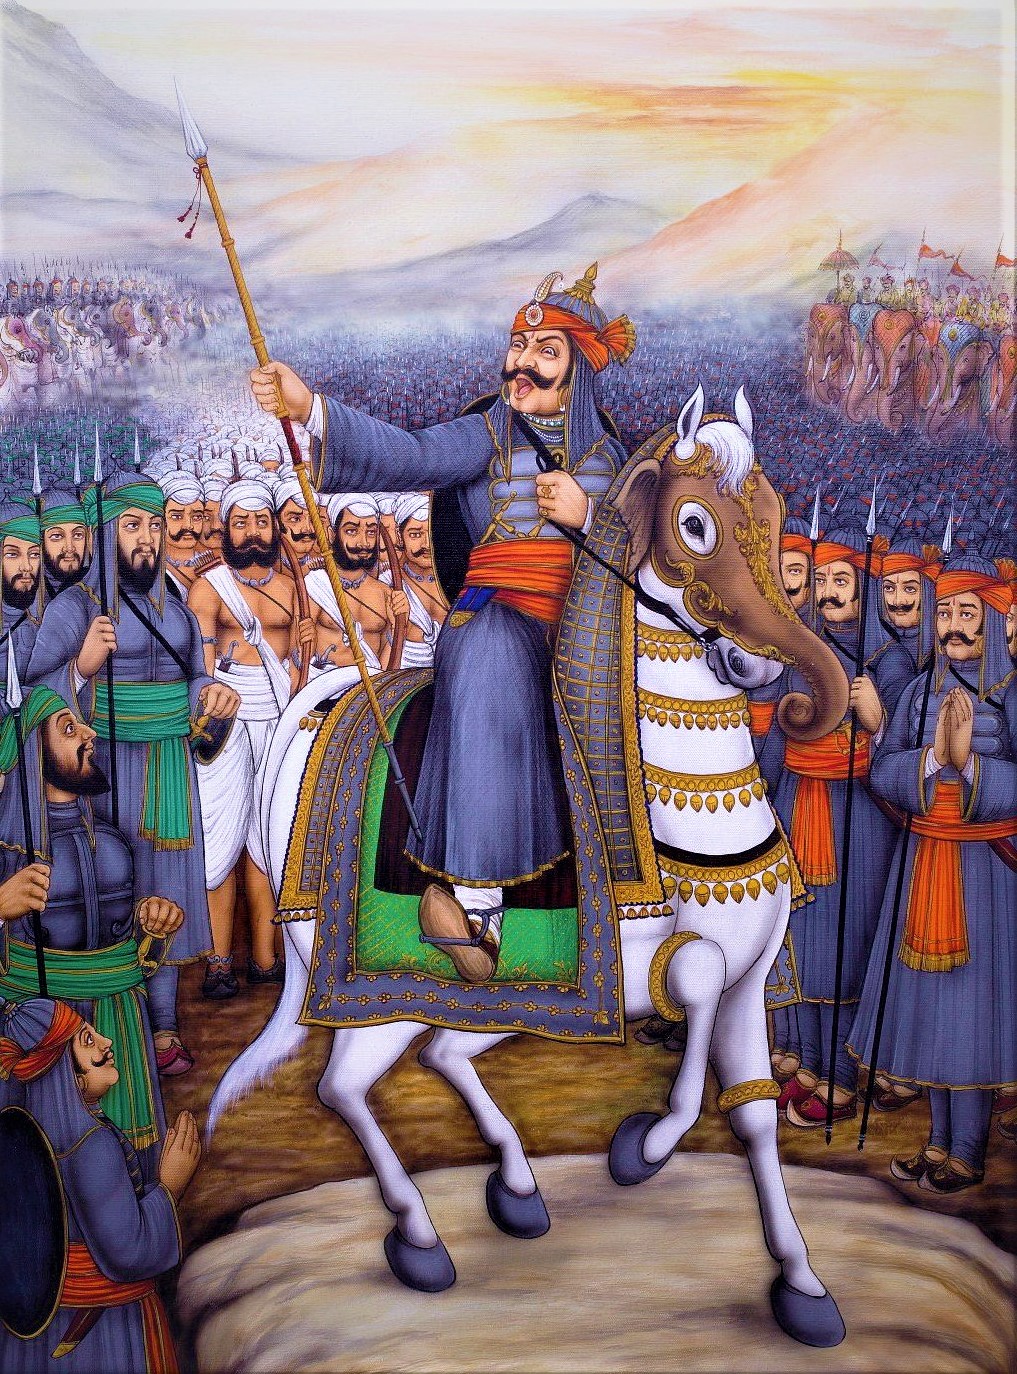 20 Less known facts about Maharana Pratap that will blow your mind